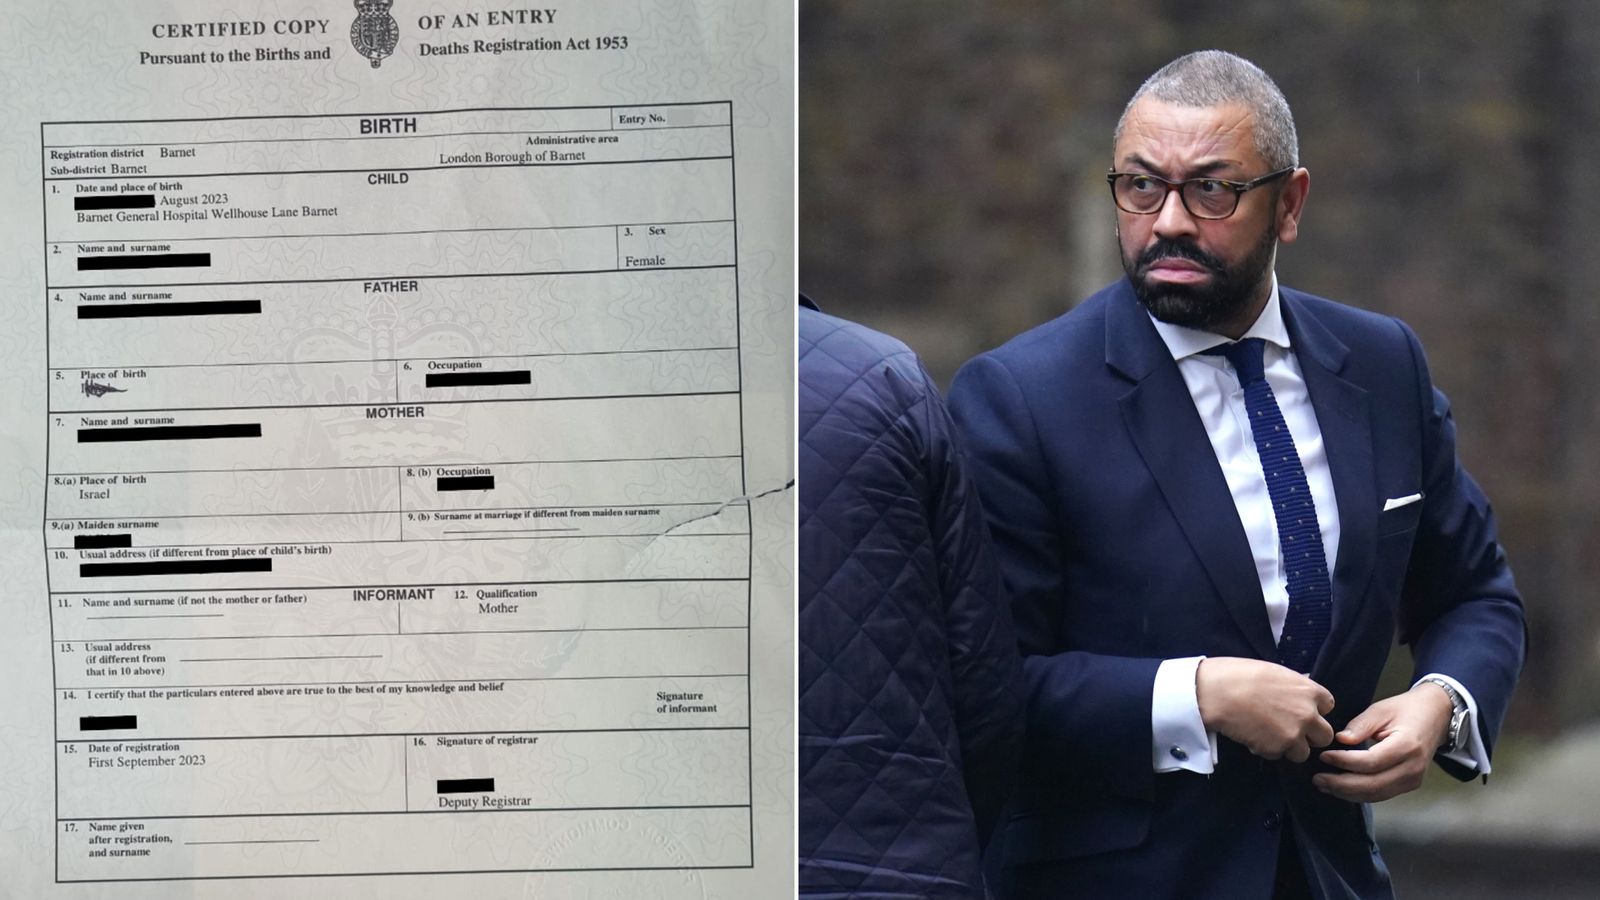 Home Office launches investigation after baby's birth certificate 'had Israel scribbled out'